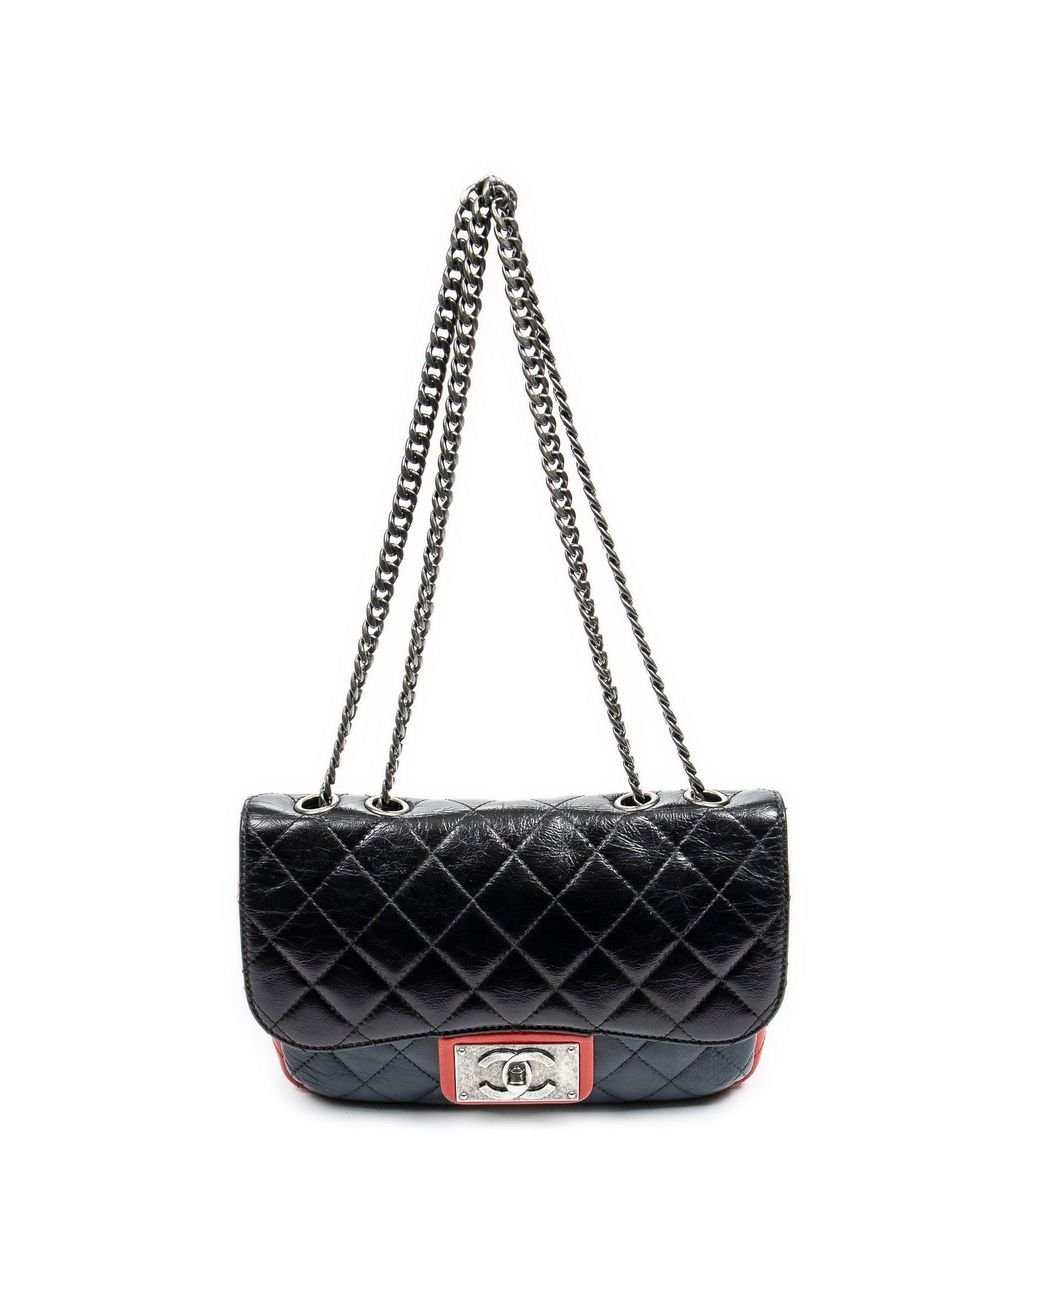 Handbags Chanel Chanel Jumbo Tricolor Classic Double Flap in Blue and Red Lambskin Leather